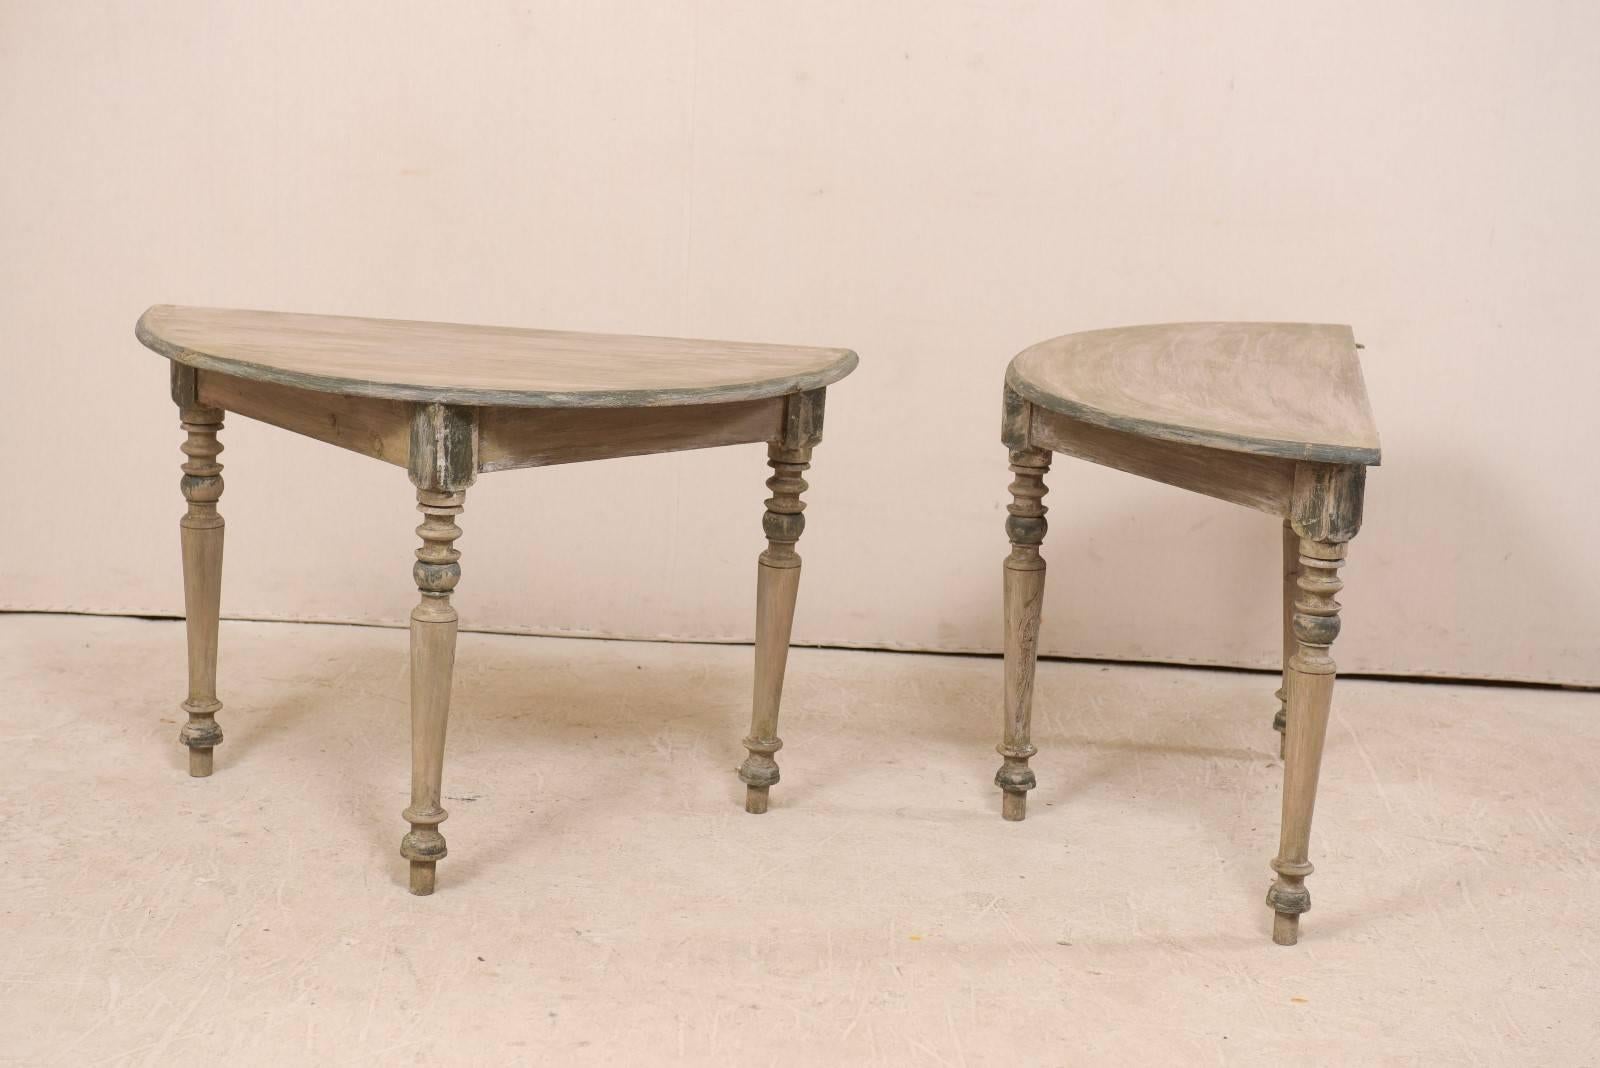 Pair of 19th Century Swedish Painted Wood Demi-lune Tables on Nicely Turned Legs 3